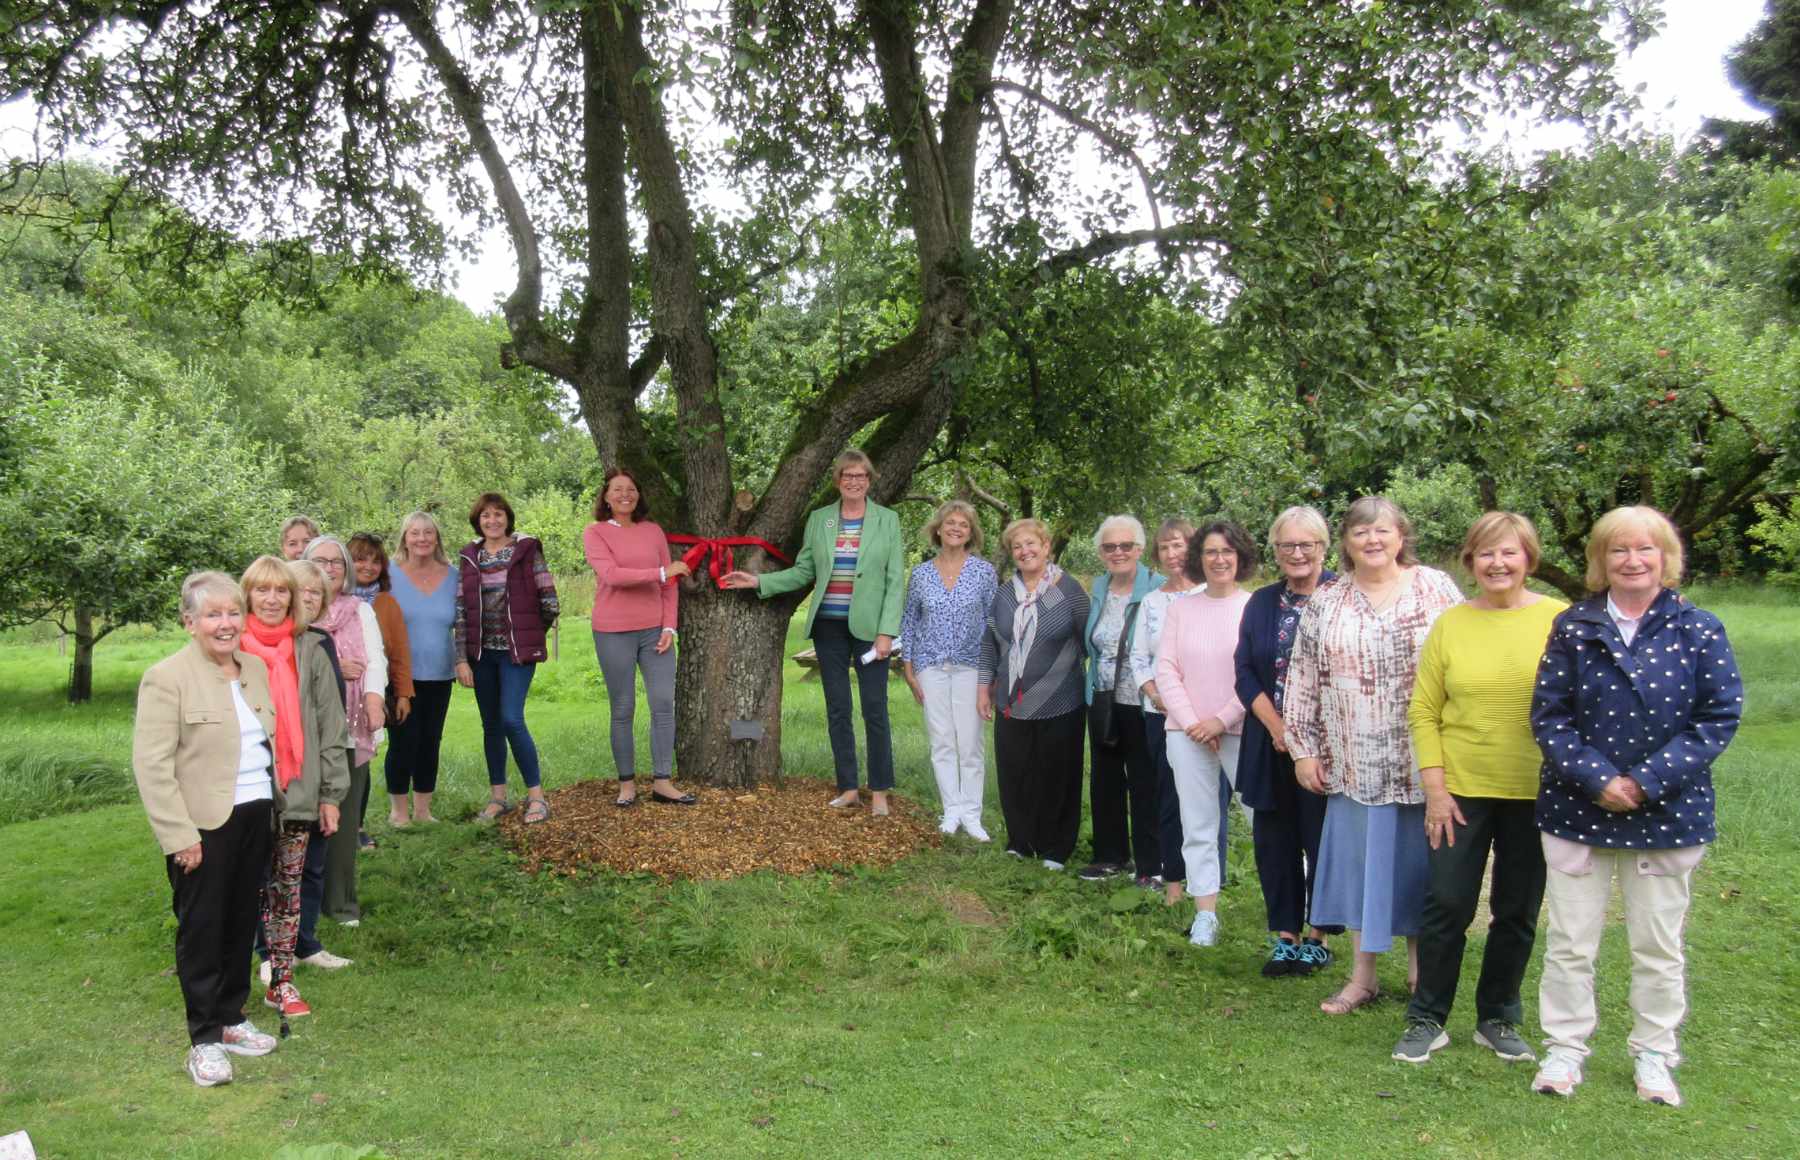 Harrogate and District Soroptimist's Sponsor 100-year-old pear tree in the Ripon Walled Garden